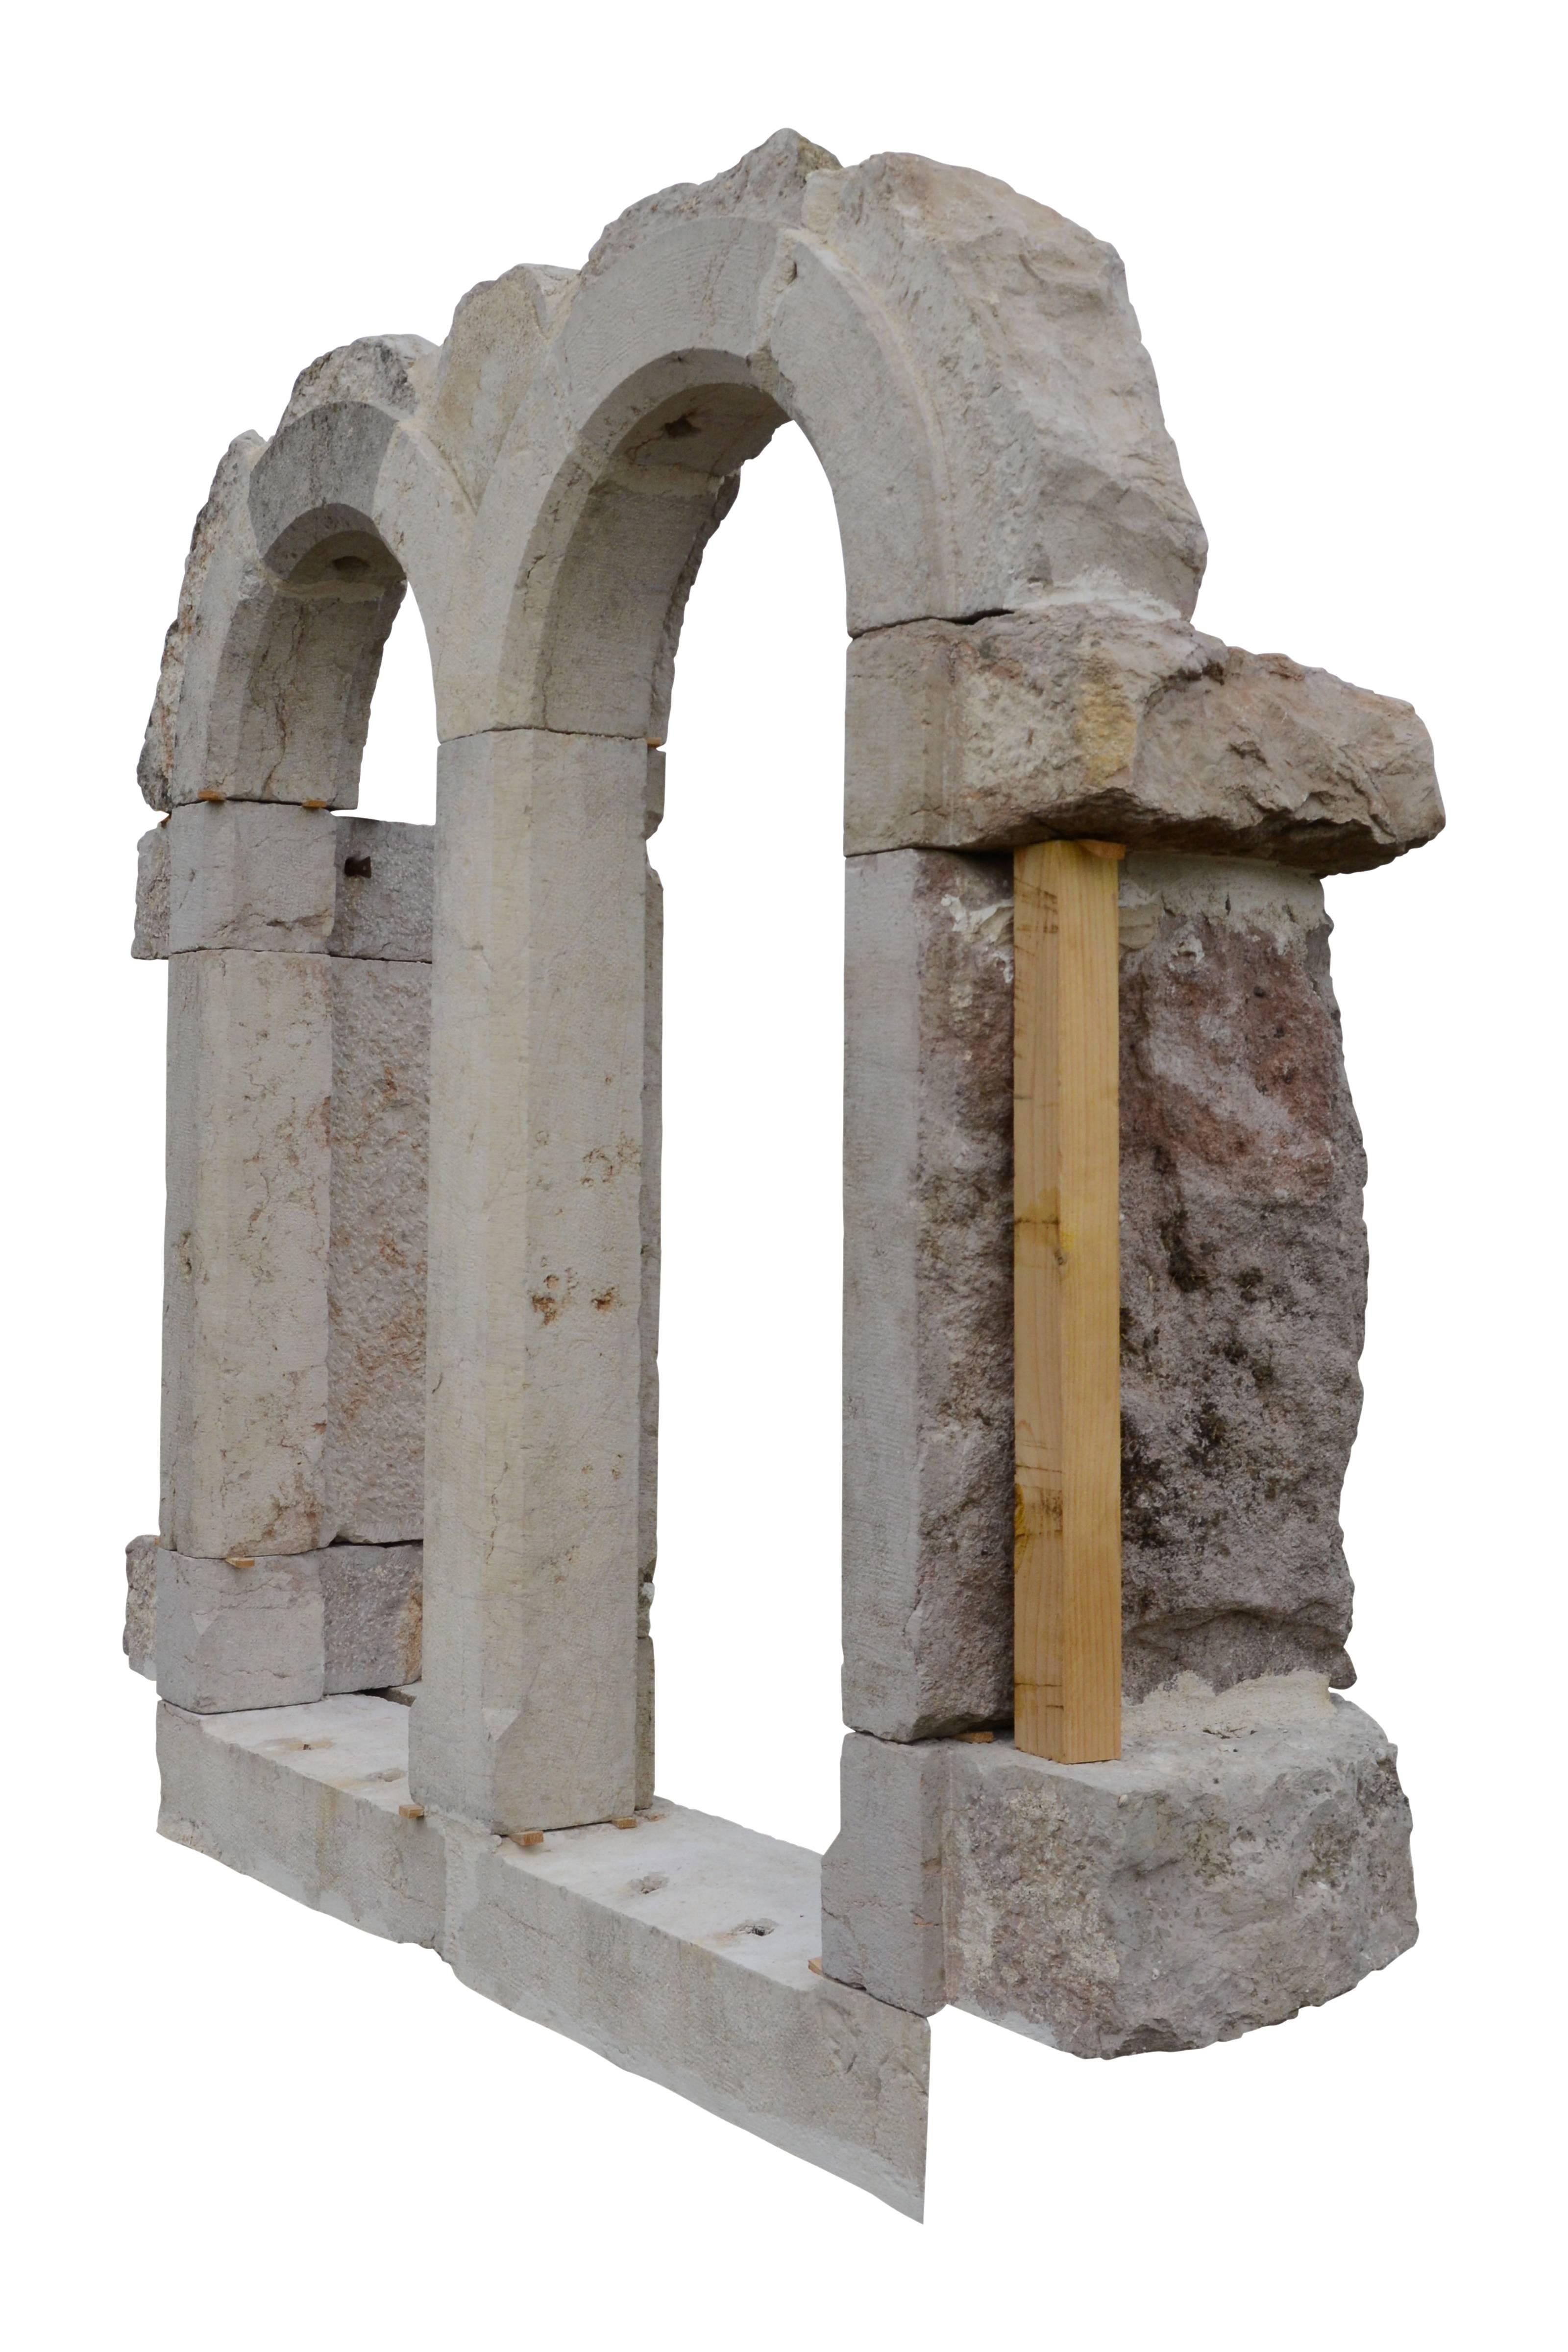 Dated from the 17th century, framing of a double roman style window with semi-circular arch. Dimensions of the openings: 59.8 x 23.6 in.